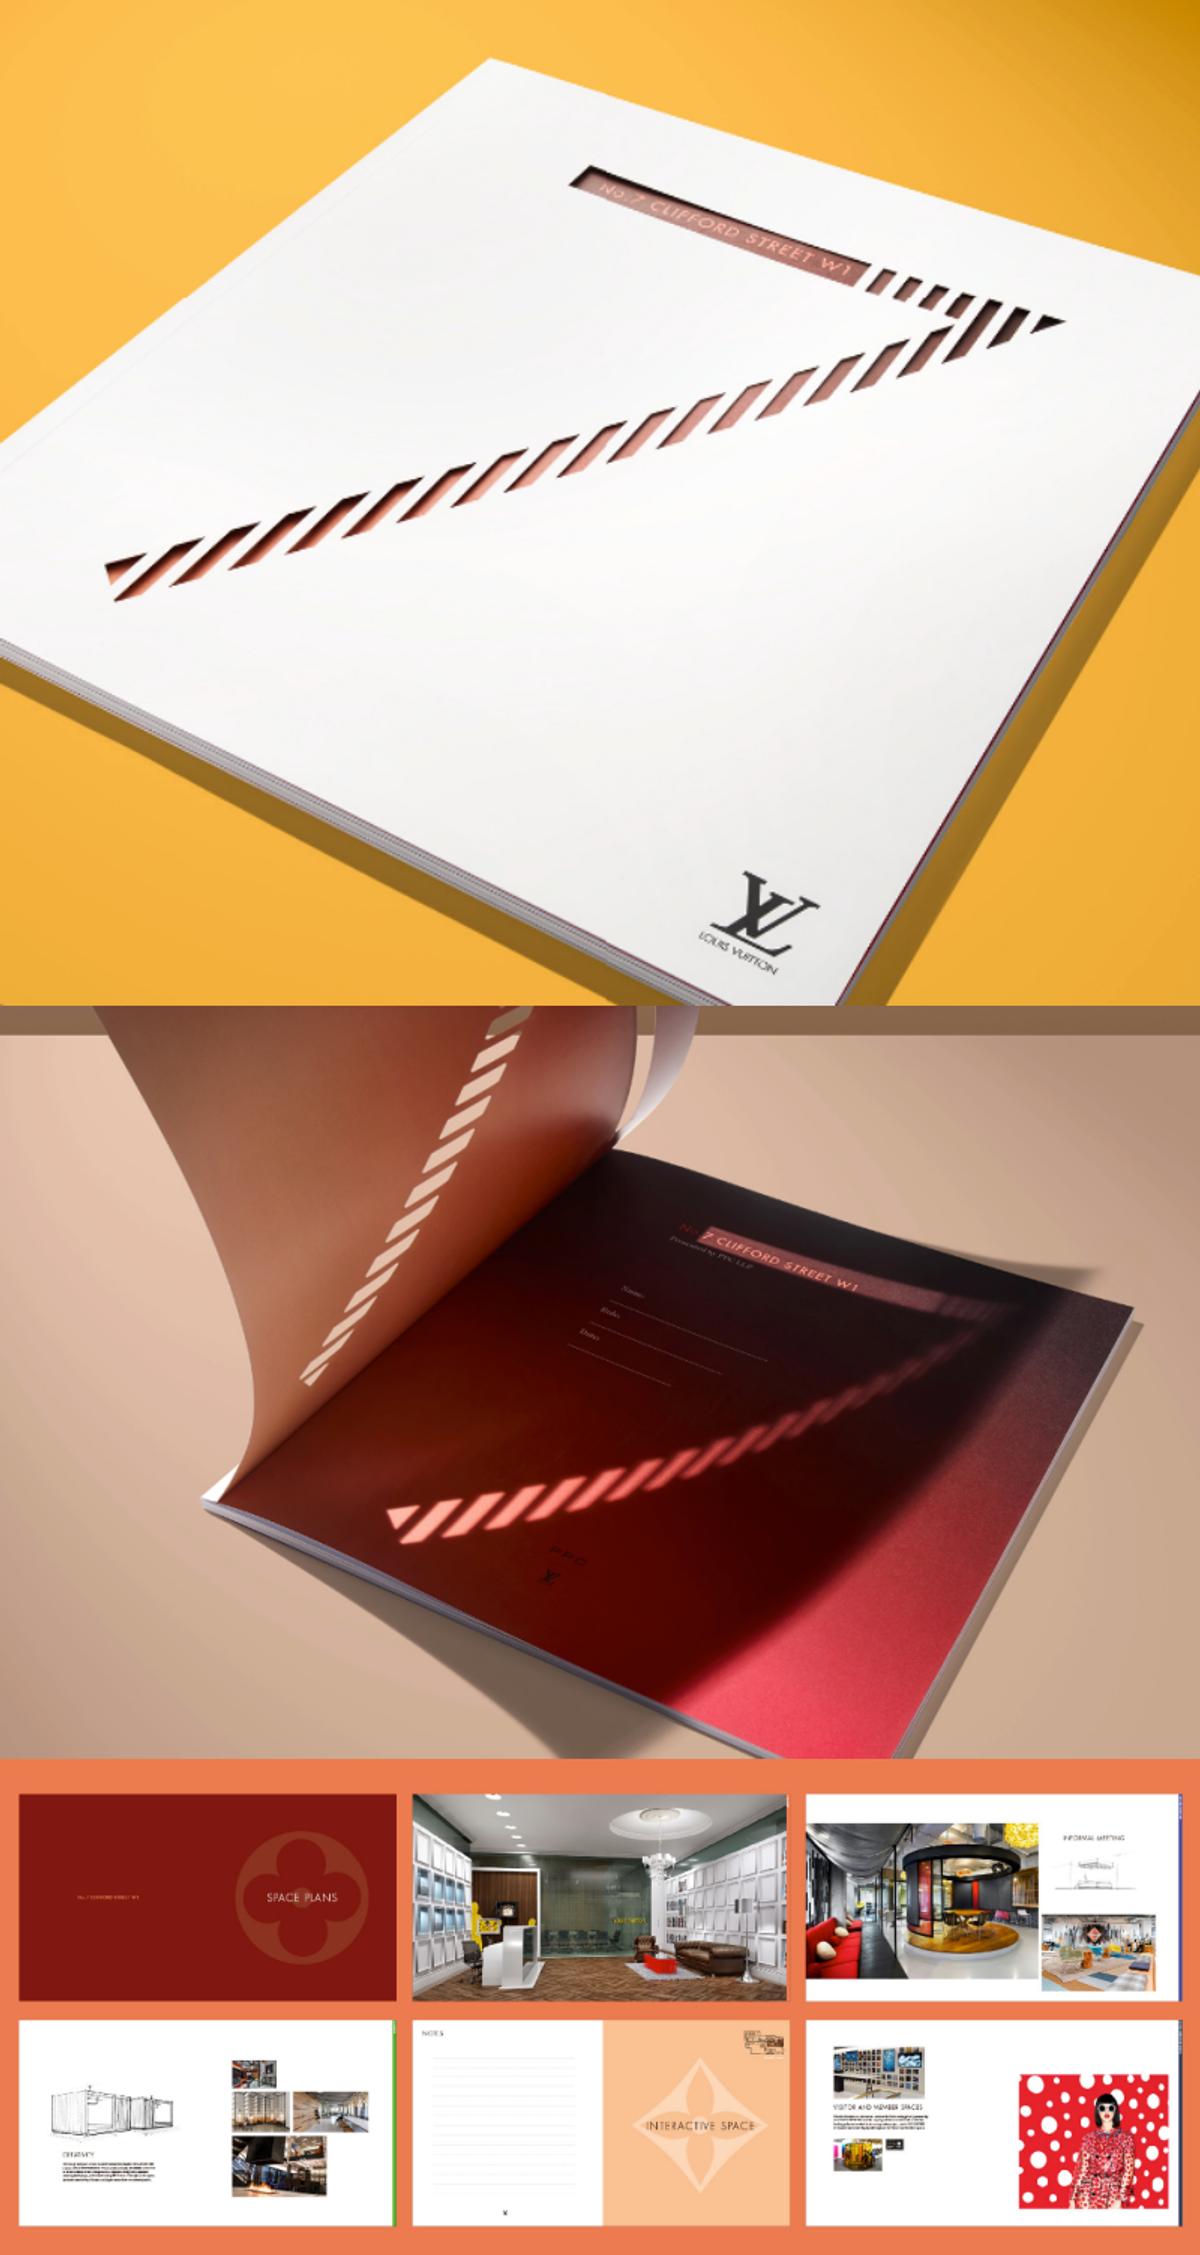 25 Creative Brochure Design Ideas that Stand Out | How to Design a Brochure in 2019 | 0